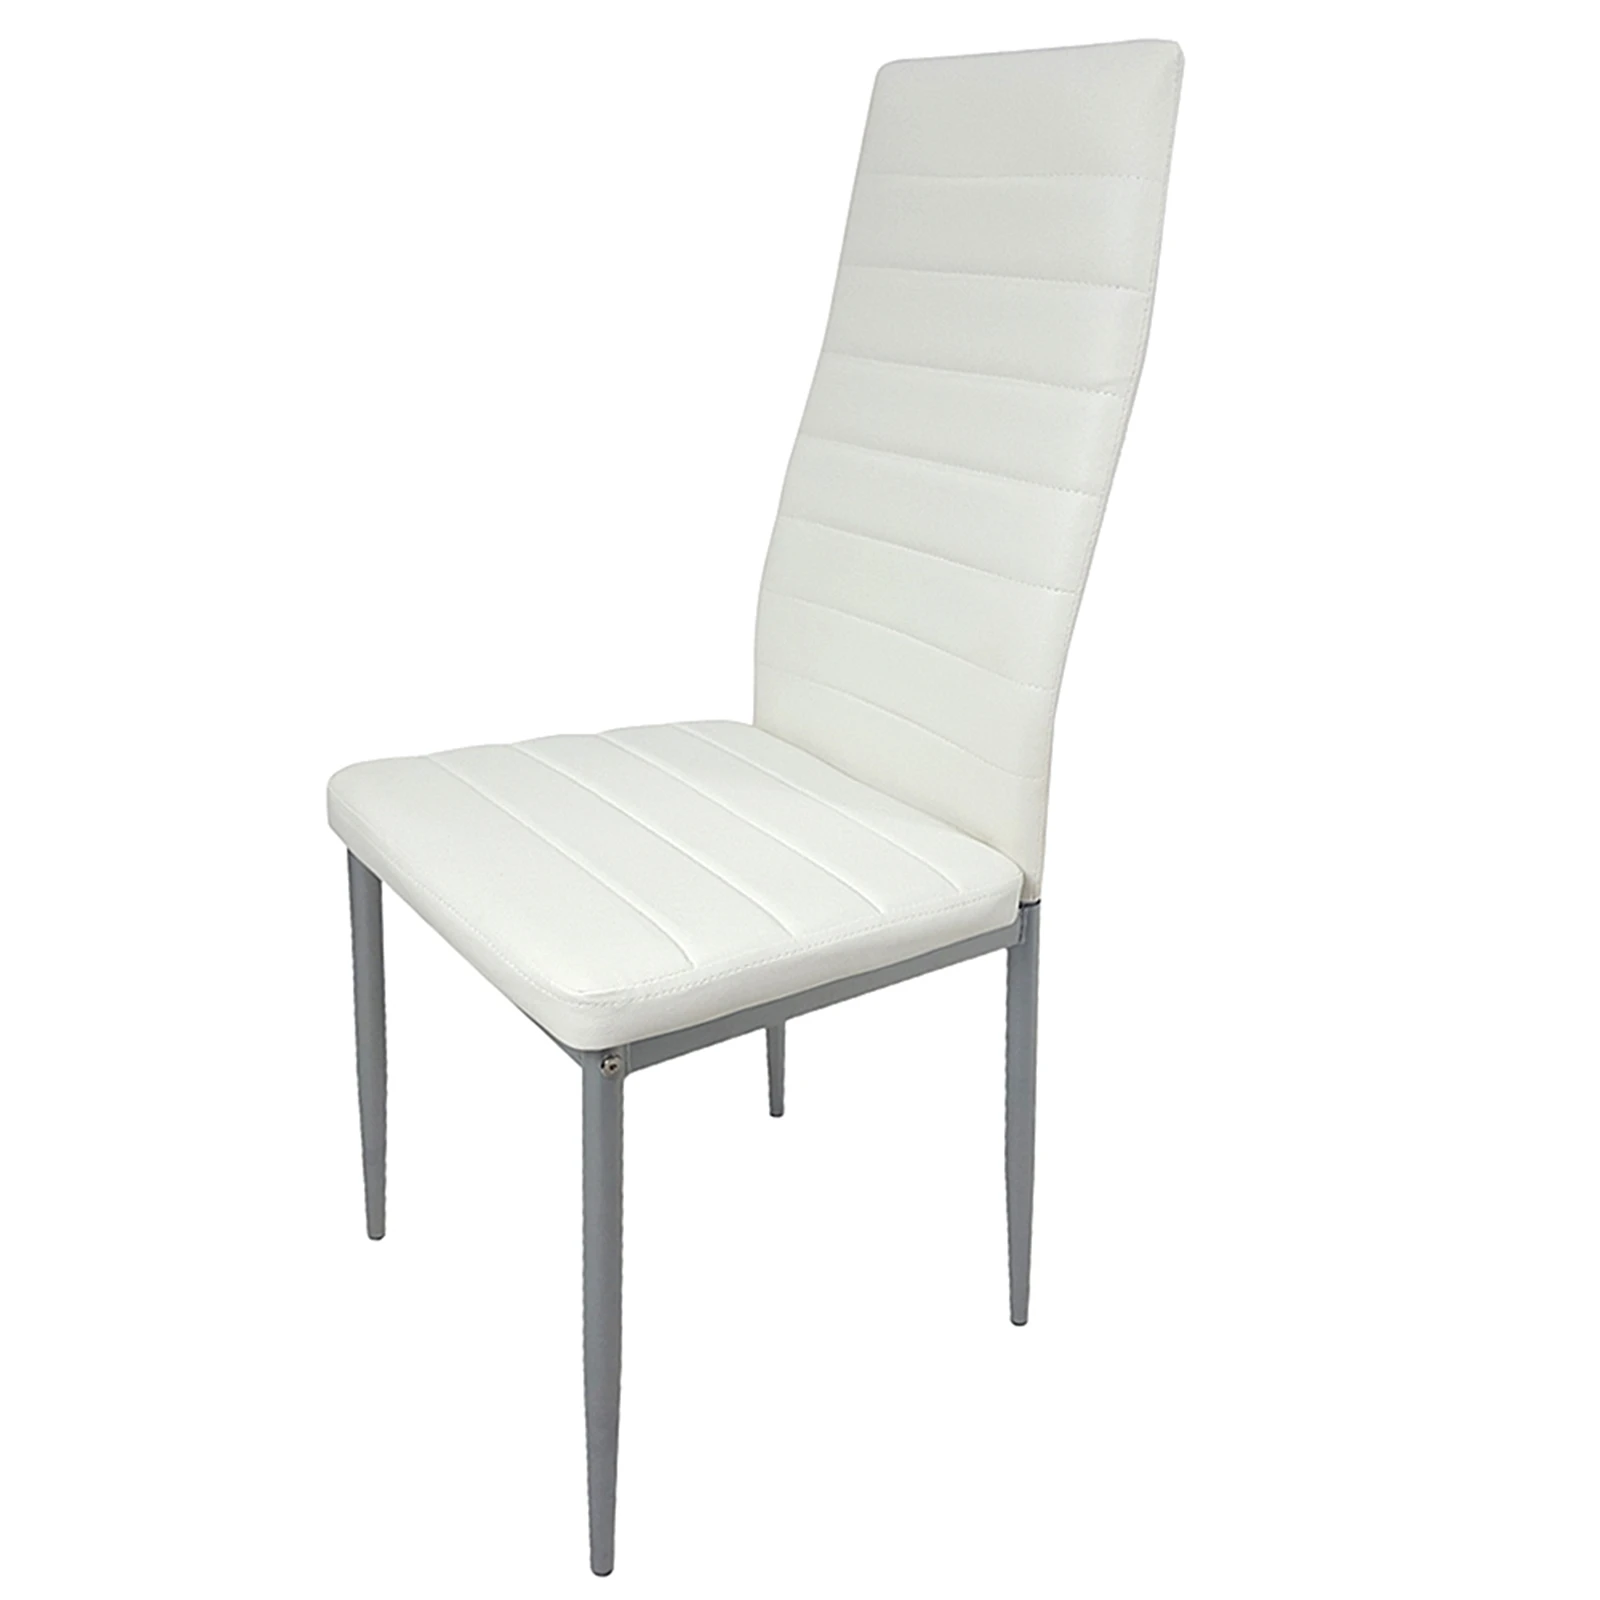 

4pcs Comfortable Dining Chairs High Grade PVC Leather Concise Design and Fine Workmanship White 42x45x96CM[US-Stock]